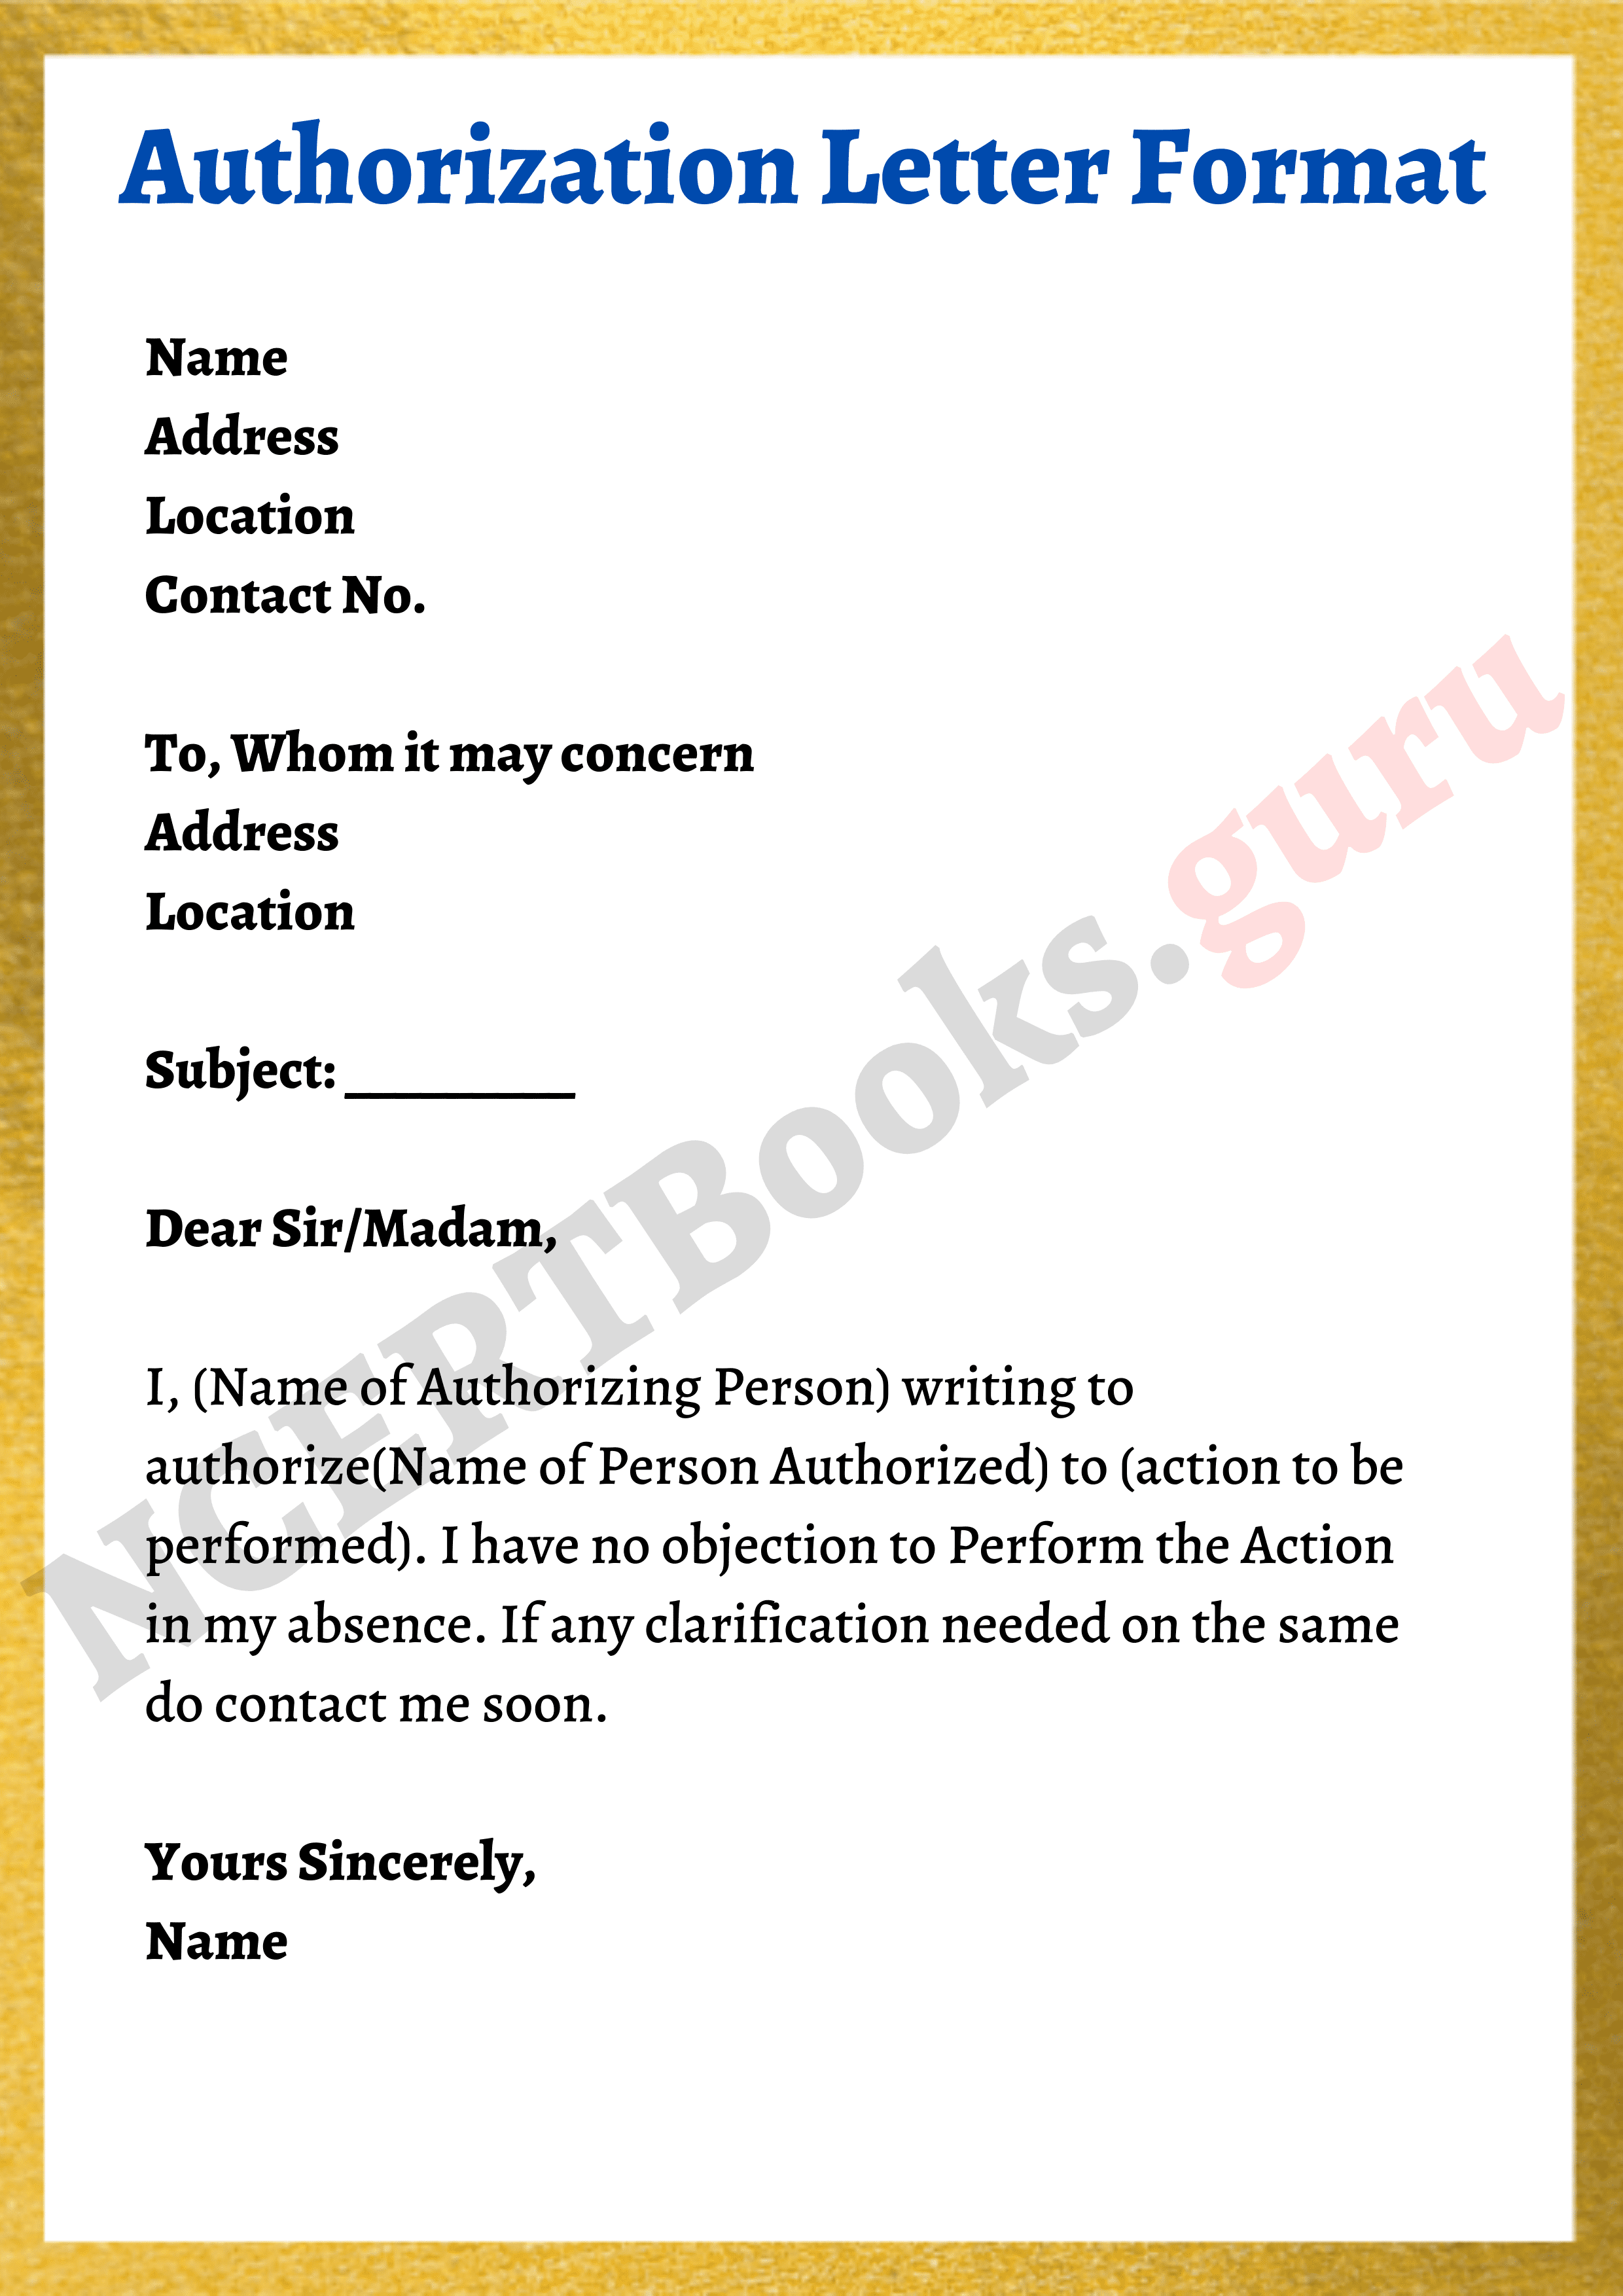 authorization-letter-template-samples-how-to-write-an-authorization